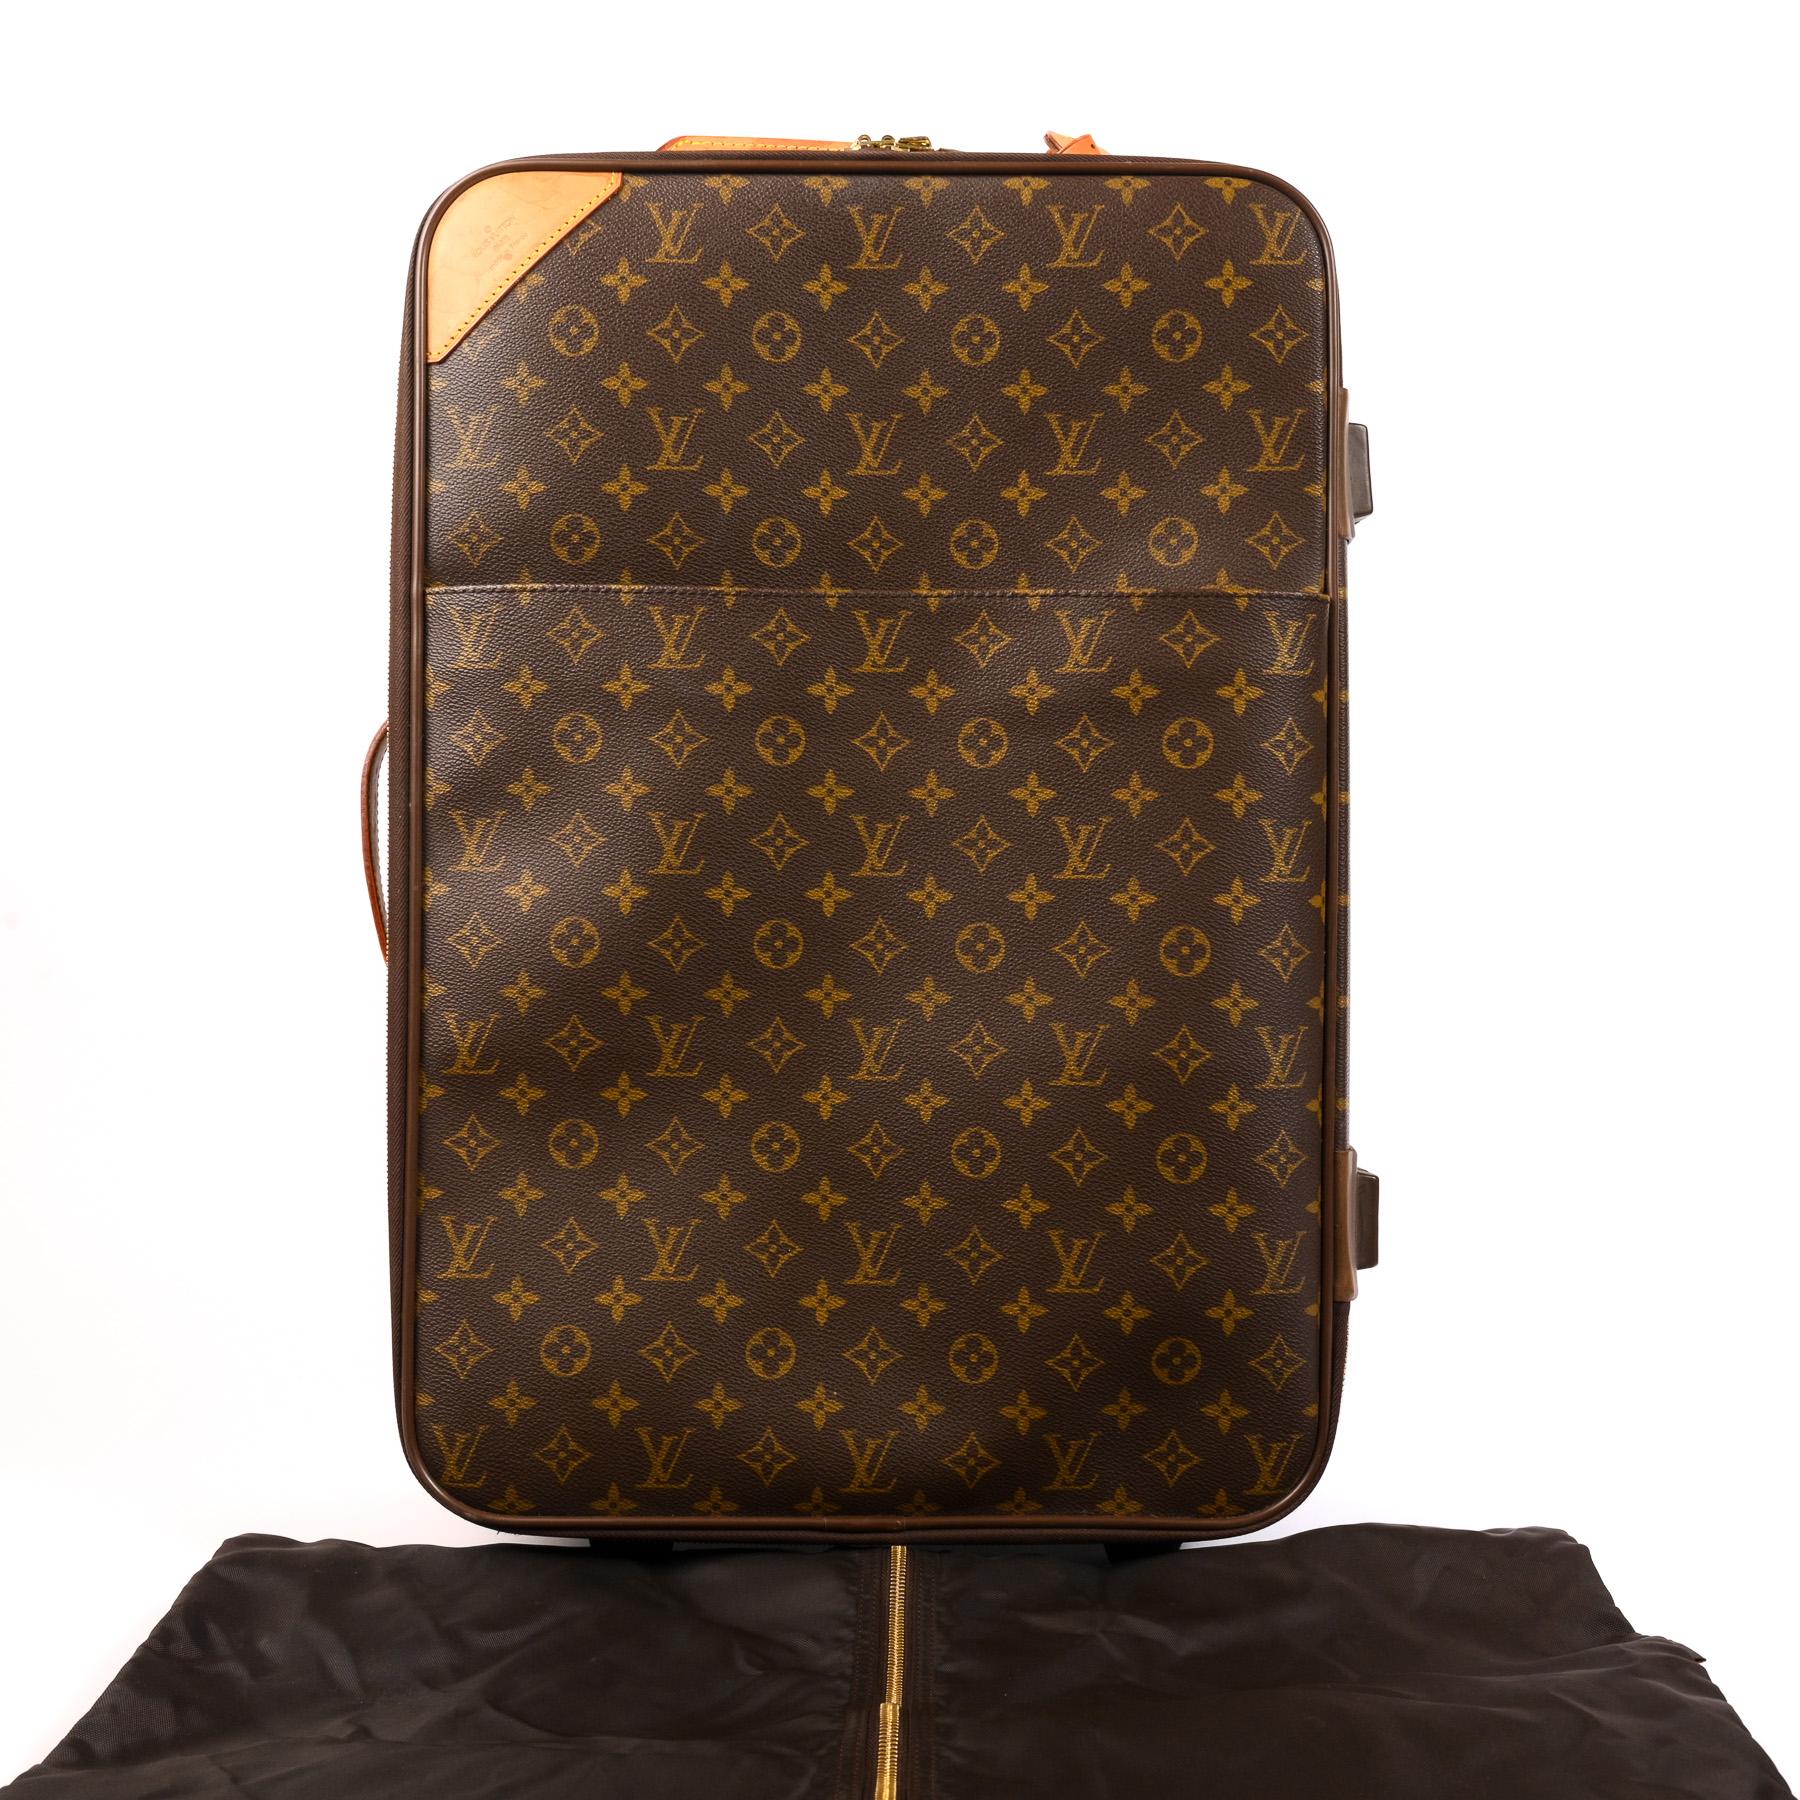 Louis Vuitton Monogram Canvas Pegase 55 Suitcase

This stunning wheeled suit-case is made of monogram canvas with gold hardware. There are two vachetta leather handles in light brown, one on the side and one on the top with a nametag attached. On